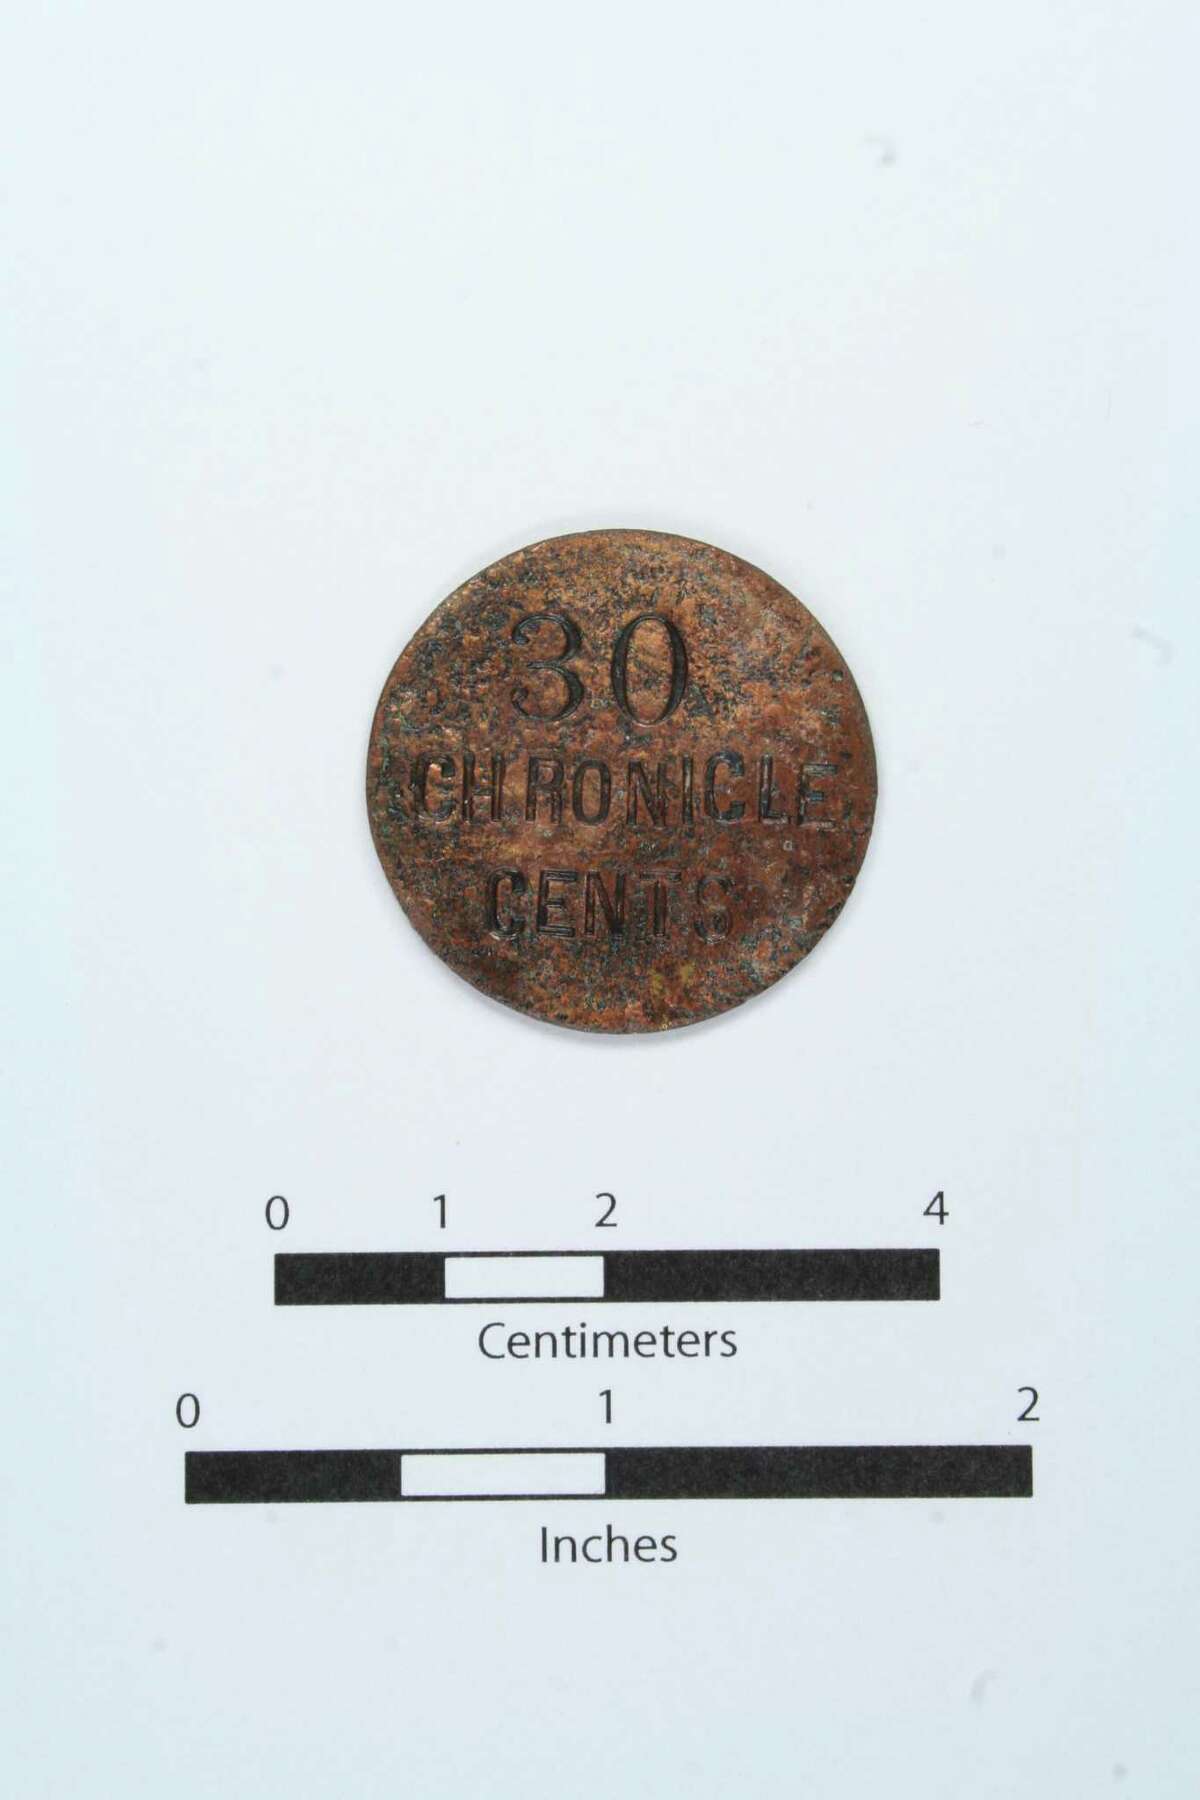 Local archaeologists found this mystery "Houston Chronicle" coin in Houston. But what is it?